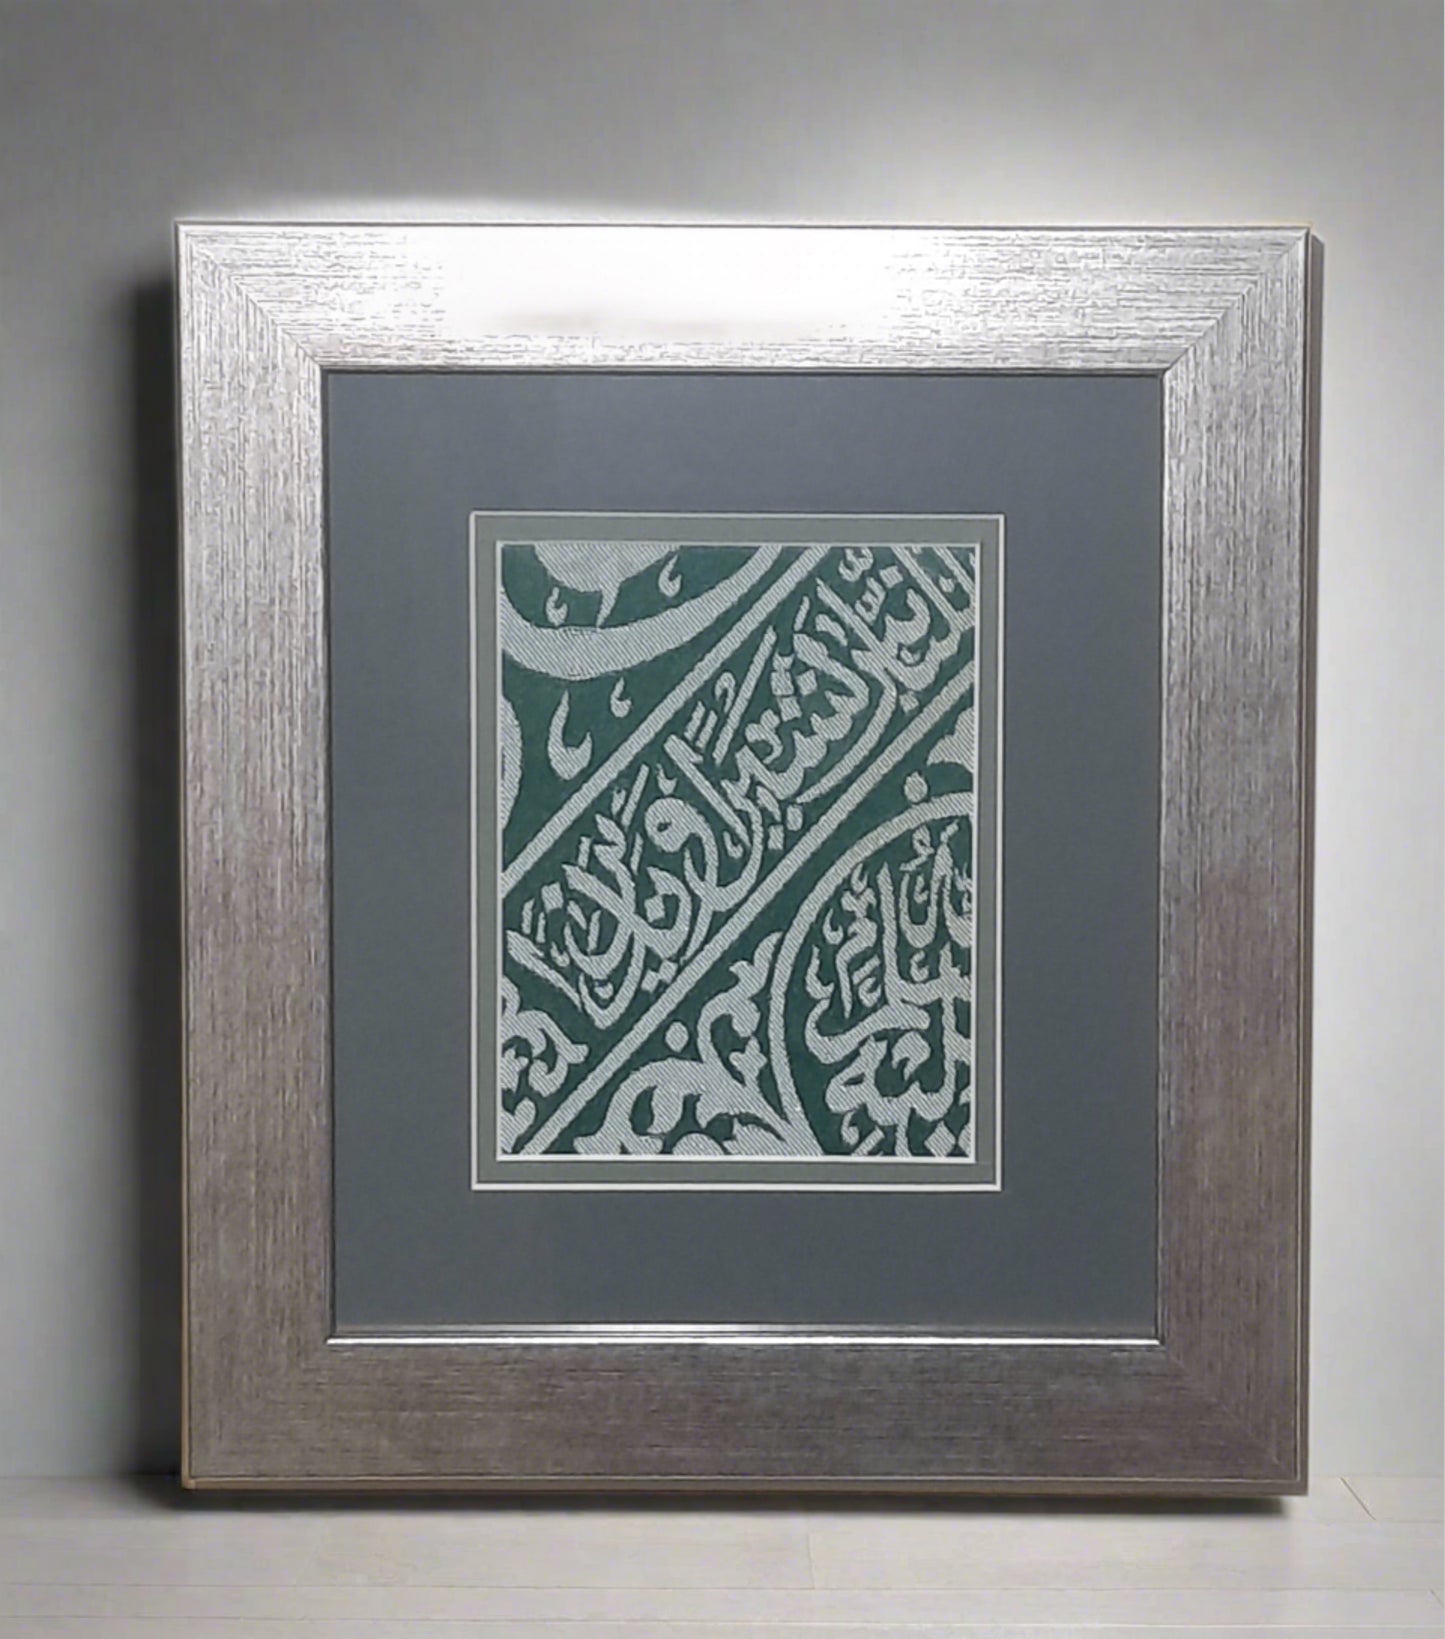 Religious Muslim Gift, Office Table Decor, Certified Muhammad Prophet Grave Chamber Cloth Fragment, Islam Frame Wall Art